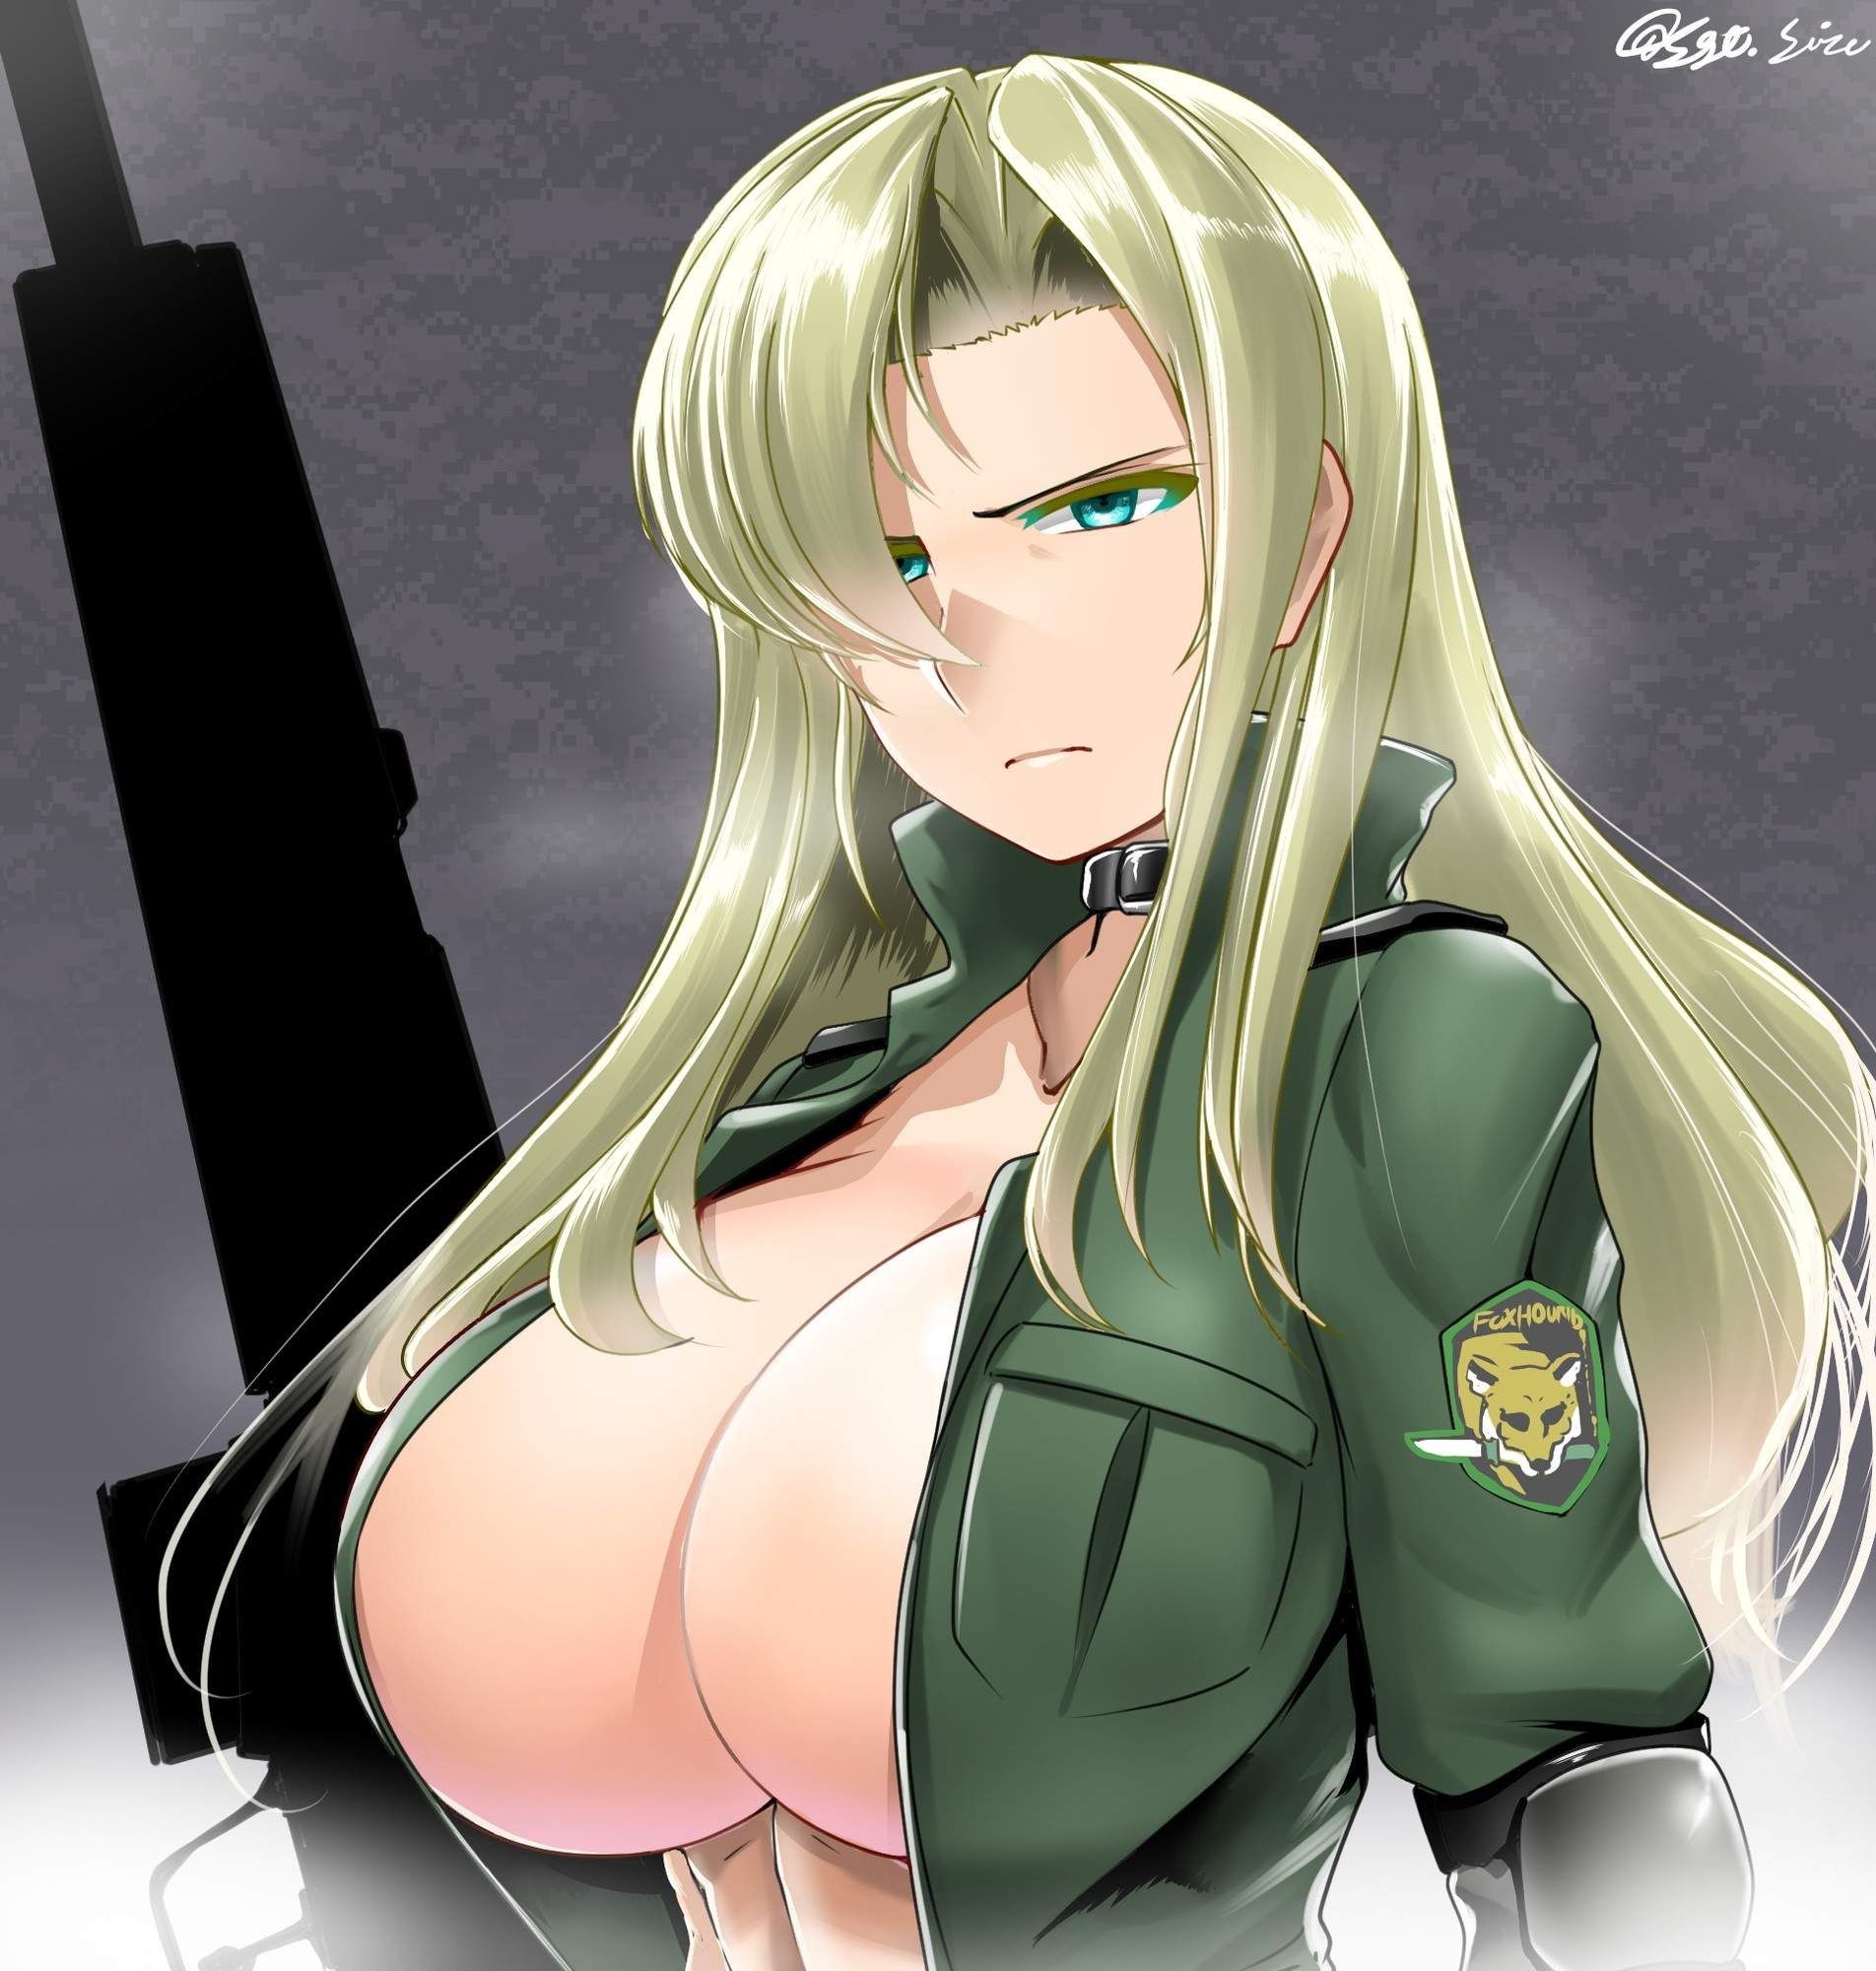 Girl It Has Collected The Image Because The Military Uniform And Combat Clothes Are Erotic. Holes